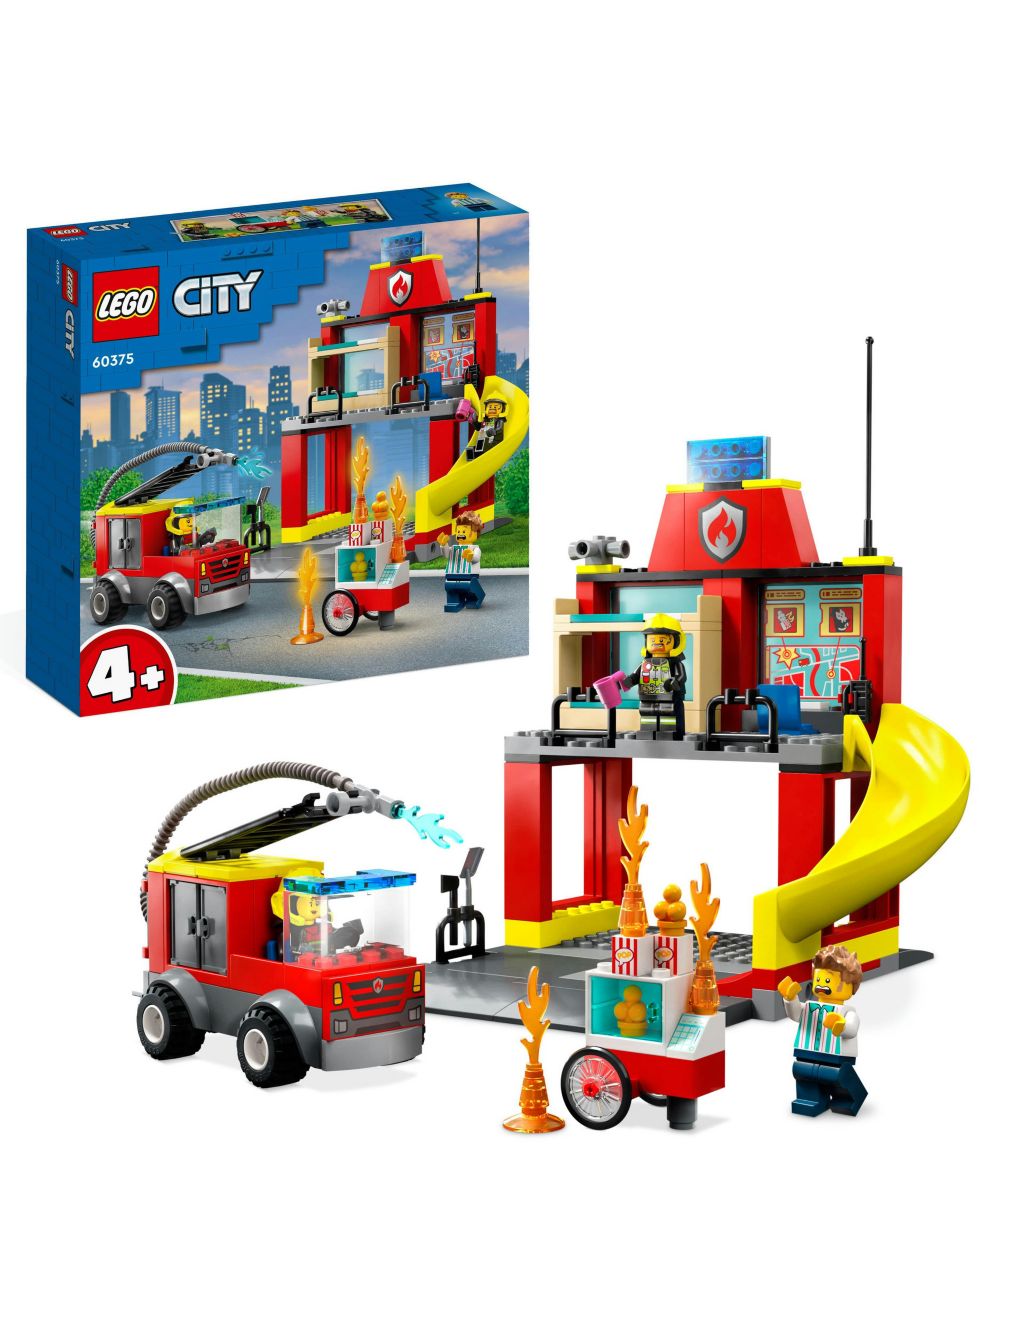 LEGO City Fire Station and Fire Engine Toys 60375 (4+ Yrs)